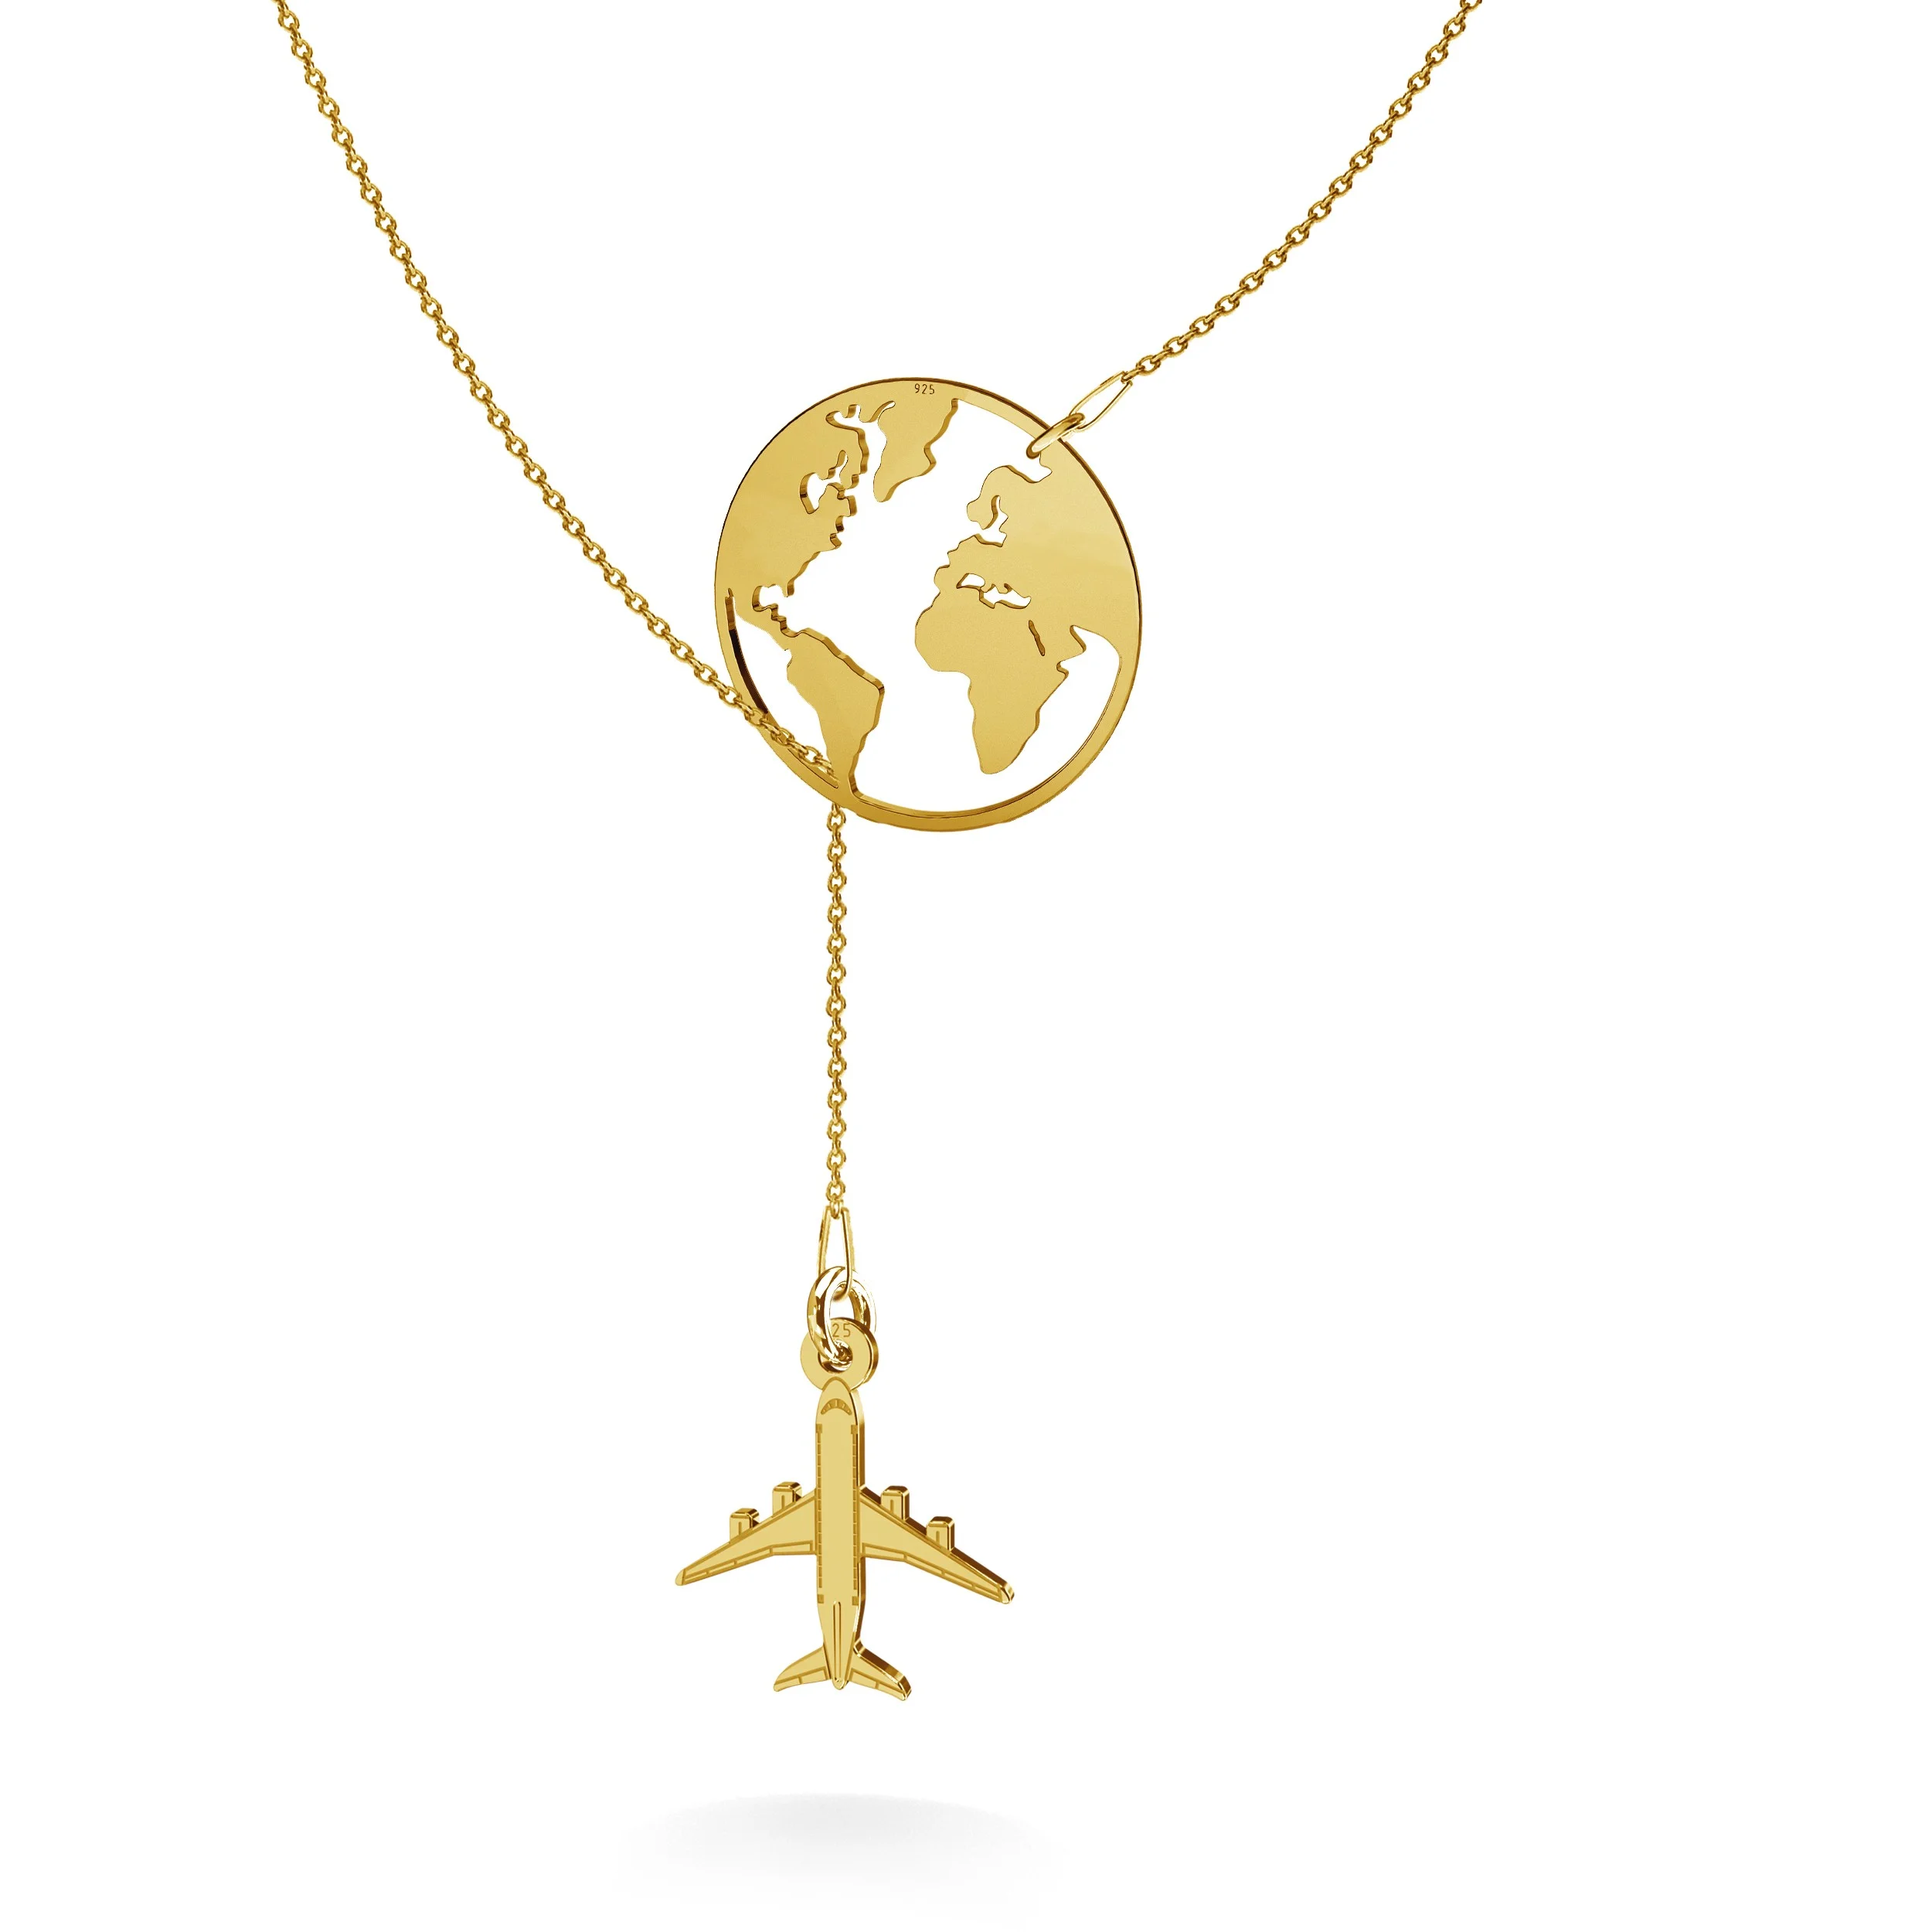 Airplane Chain With Engraving Personalized Chain Travel 